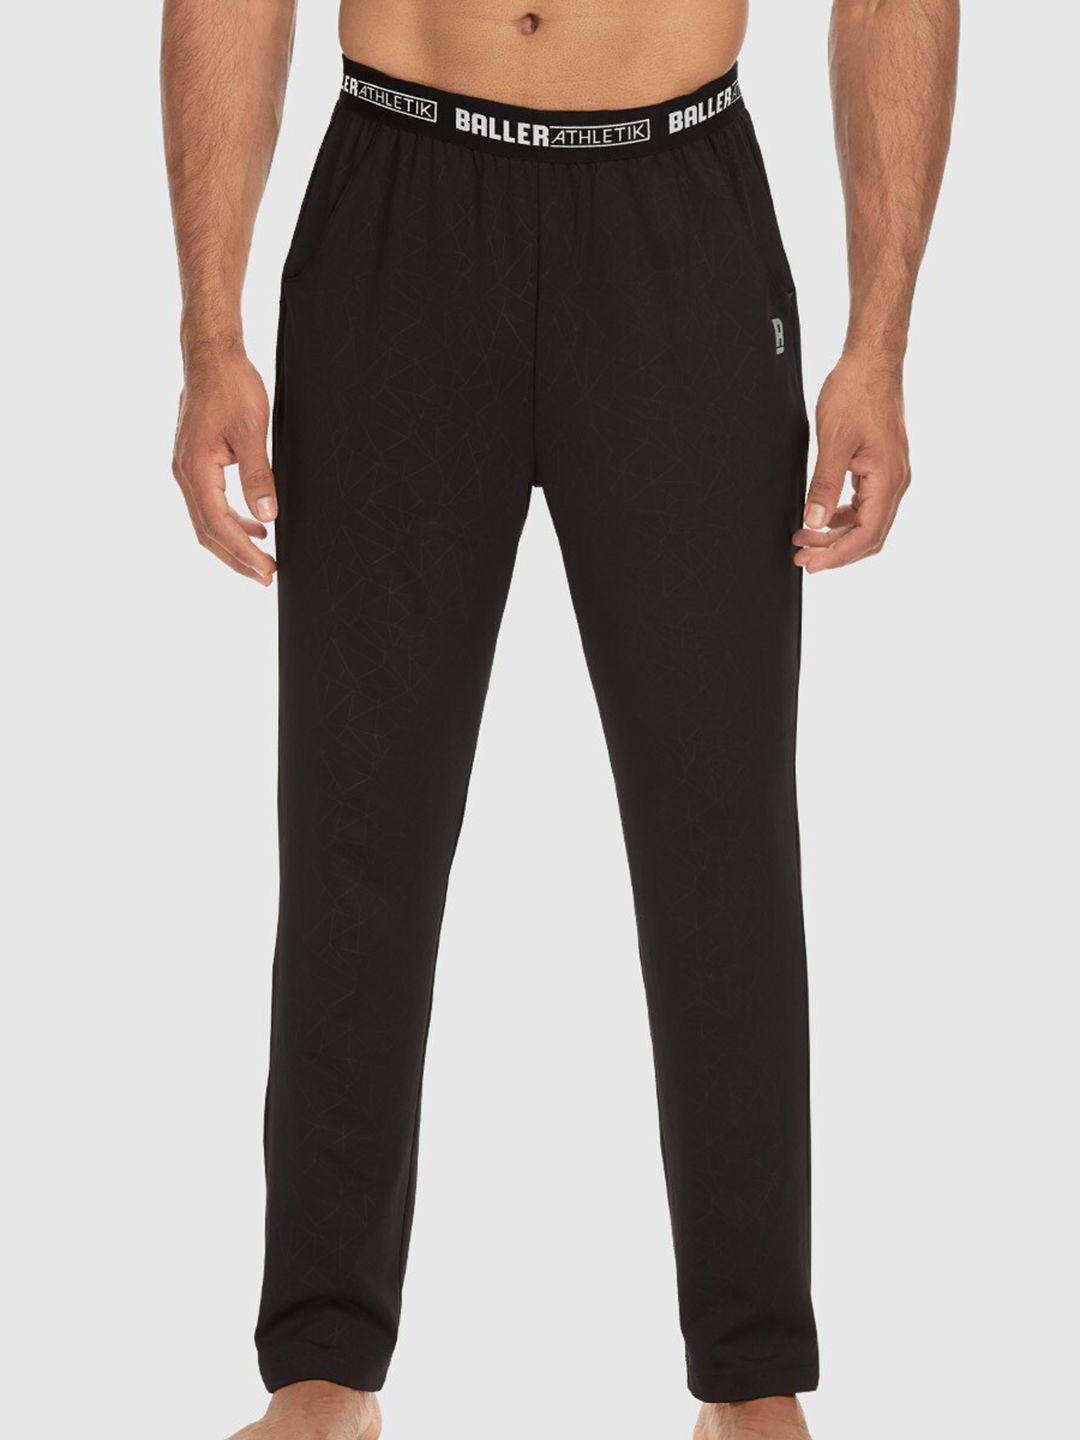 baller athletik mid-rise recovery lounge pants